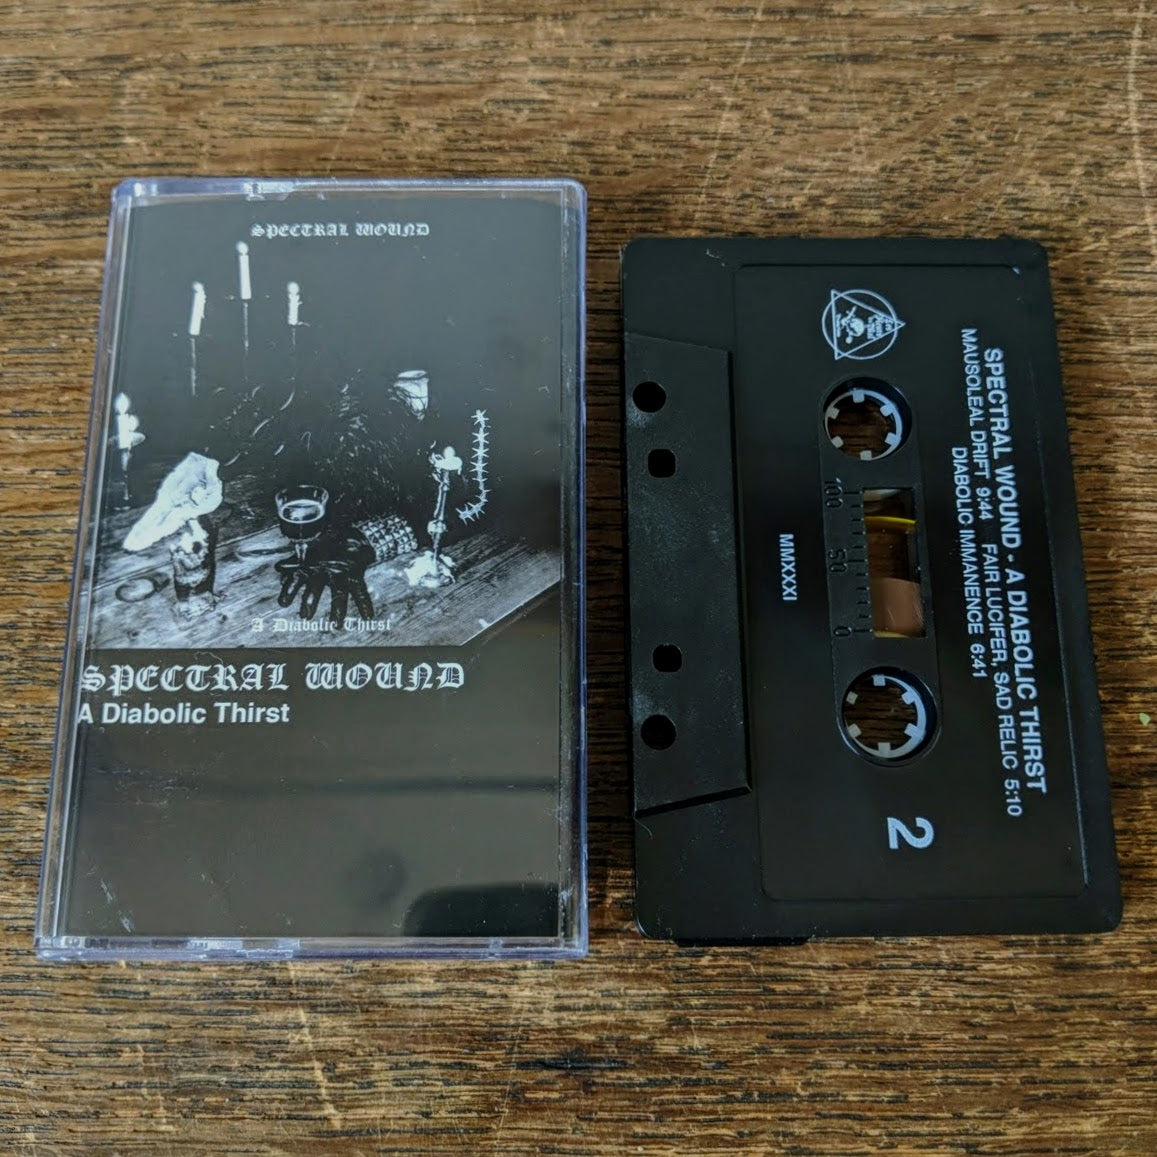 [SOLD OUT] SPECTRAL WOUND "A Diabolical Thirst" Cassette Tape